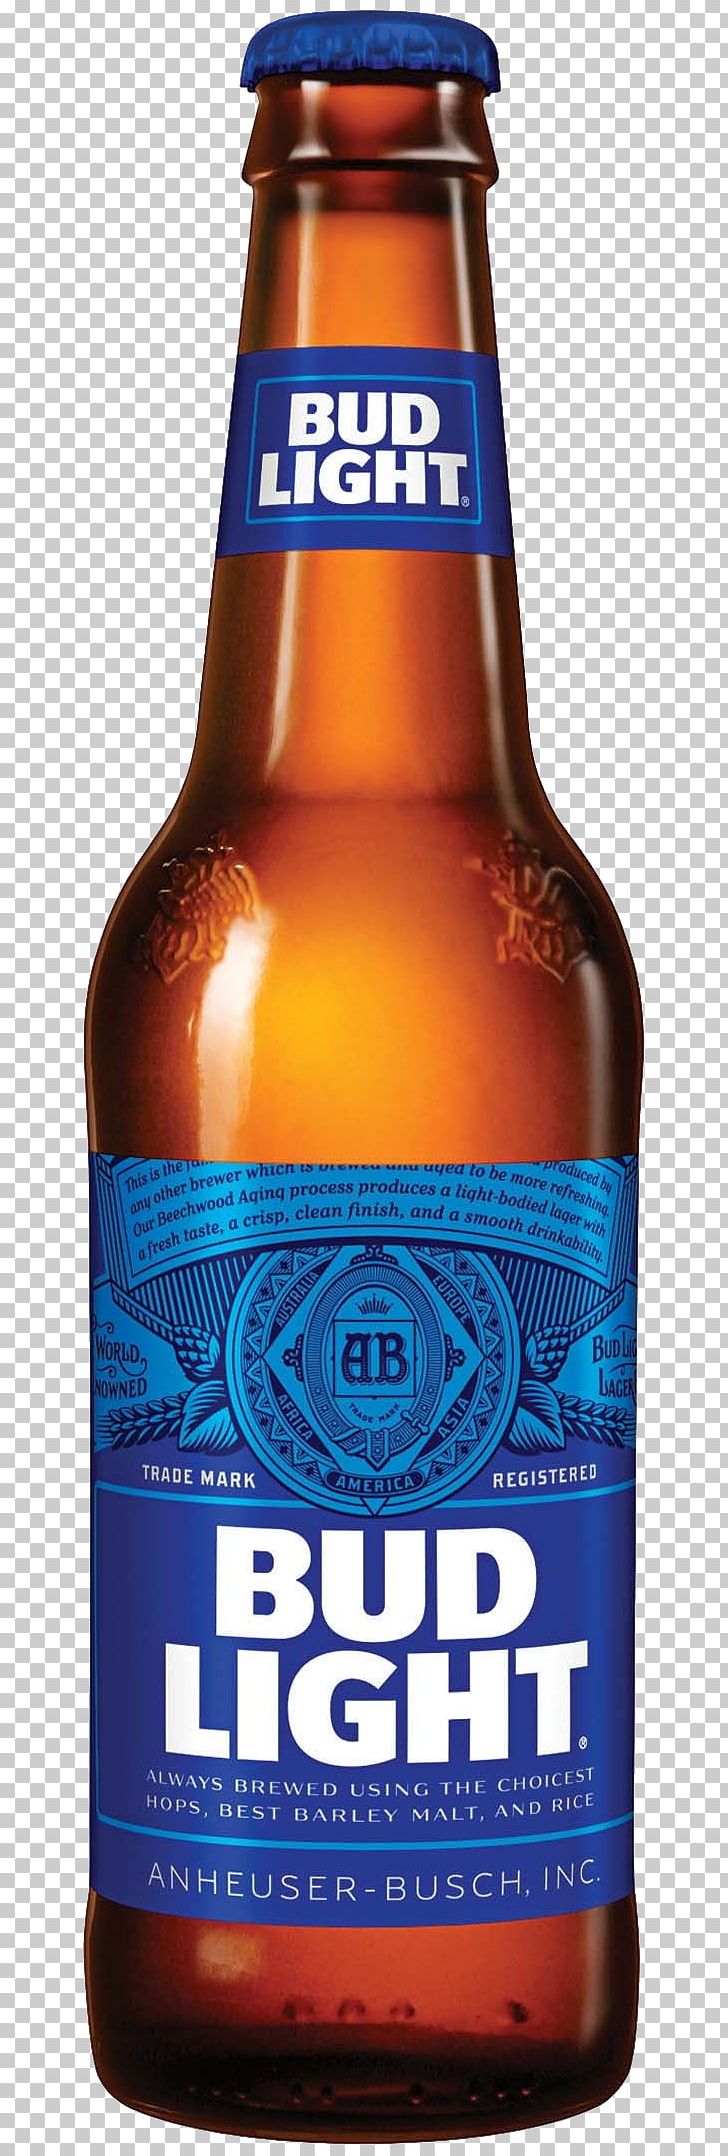 Budweiser Beer Pale Lager New Belgium Brewing Company Anheuser-Busch Bud Light PNG, Clipart, Alcoholic Beverage, Ale, Aluminium Bottle, Anheuserbusch Brands, Beer Free PNG Download